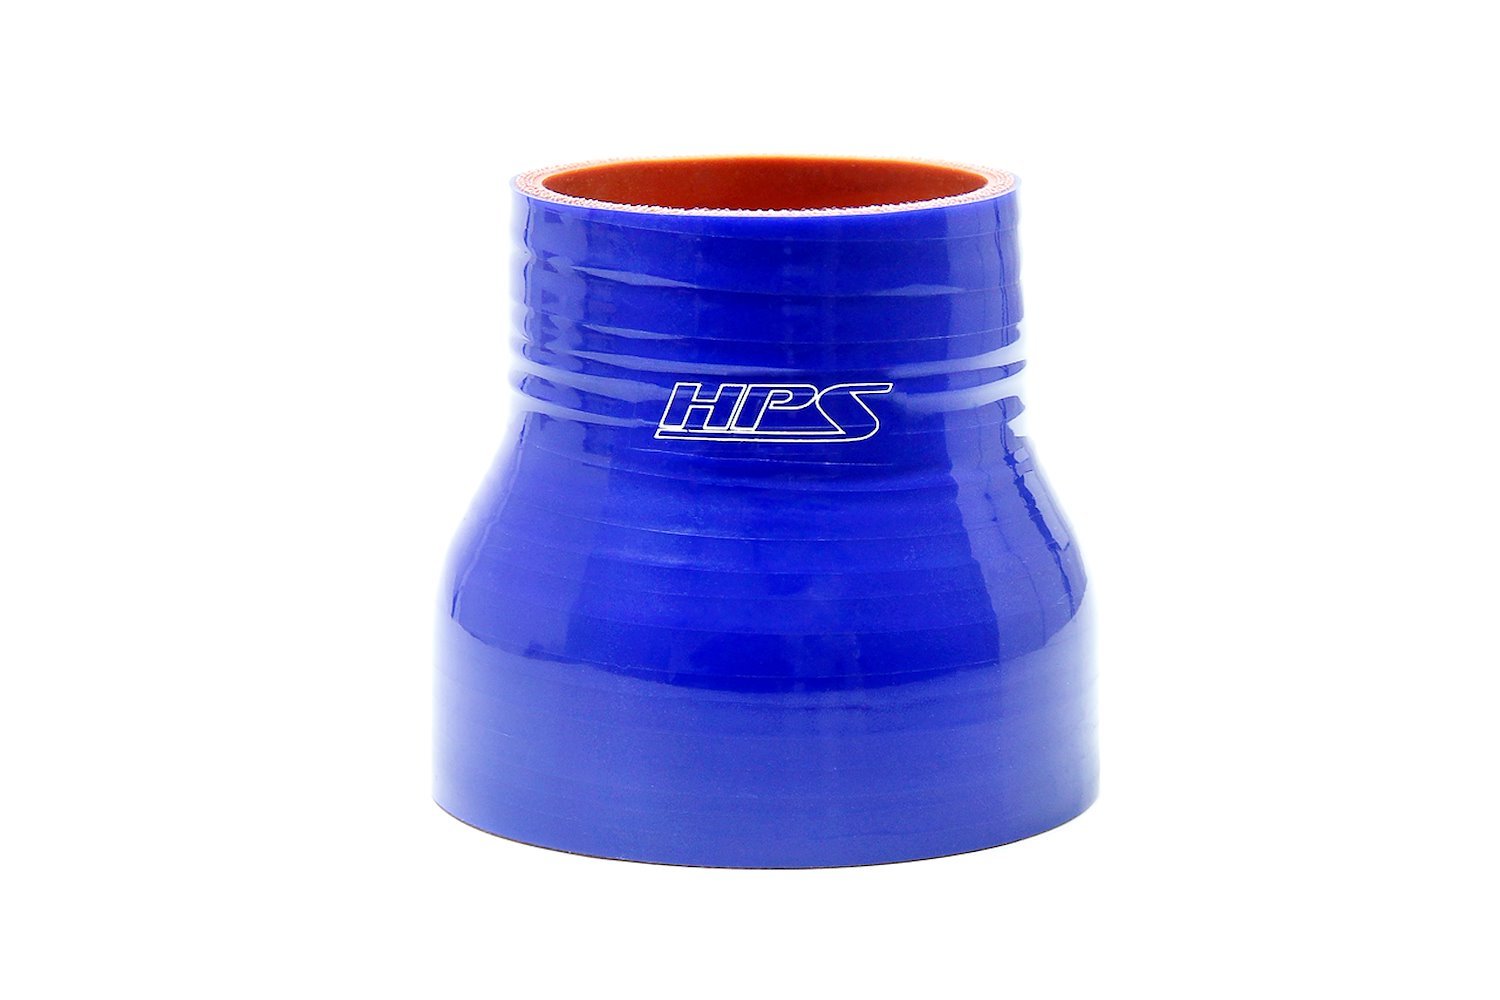 HTSR-238-275-L4-BLUE Silicone Reducer Hose, High-Temp 4-Ply Reinforced, 2-3/8 in. - 2-3/4 in. ID, 4 in. Long, Blue